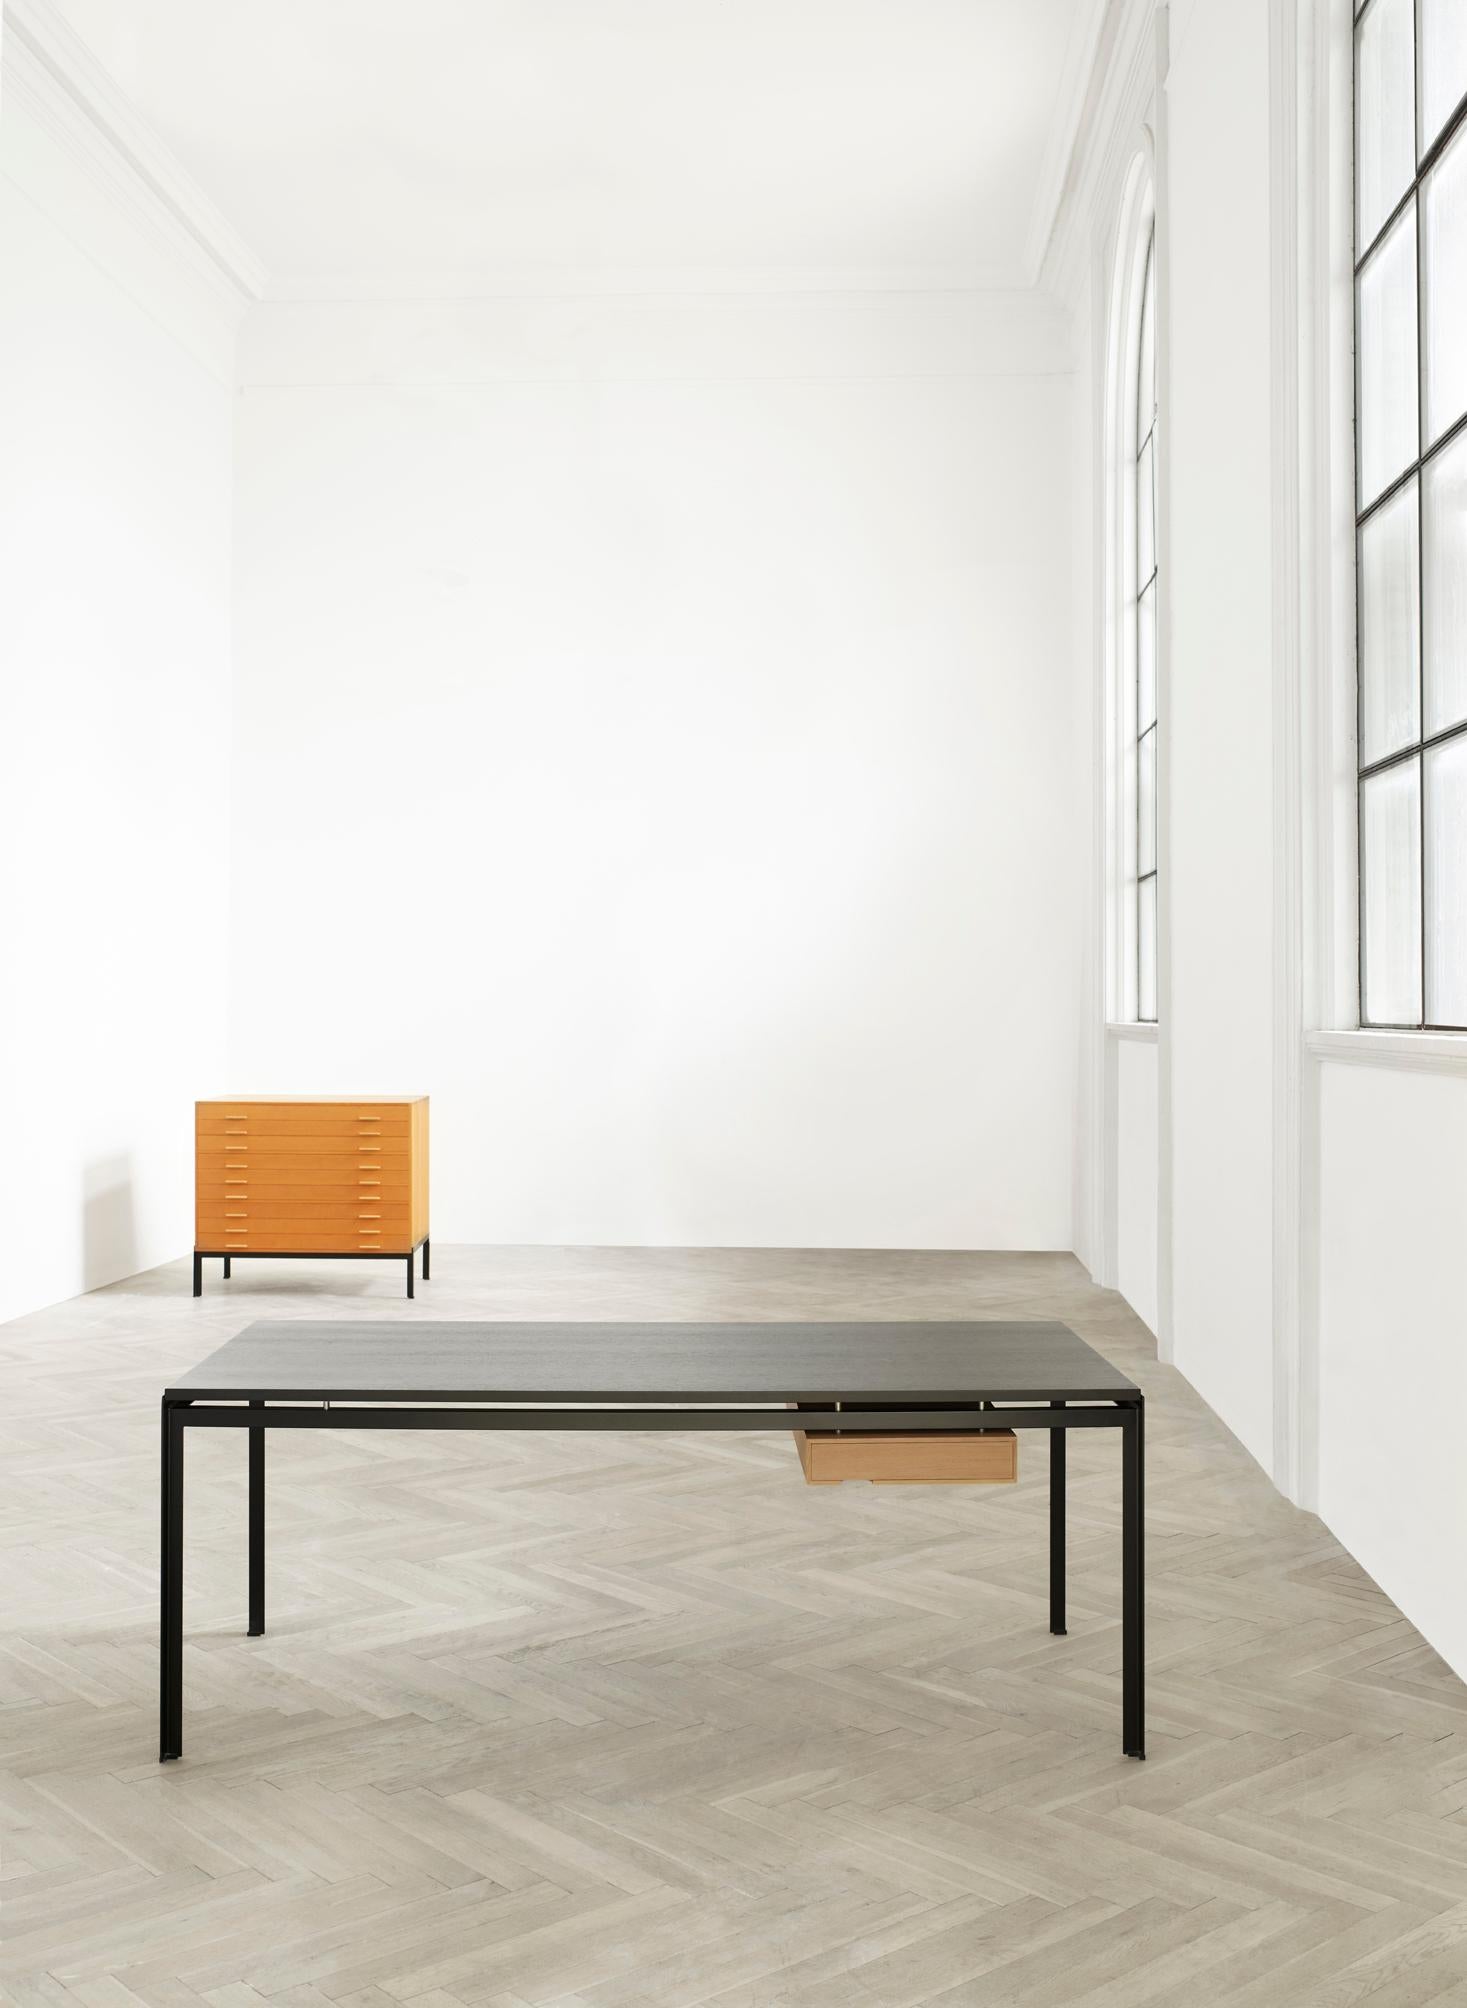 Danish PK52A Student Desk in Wood Finishes with Gray Steel Base by Poul Kjærholm